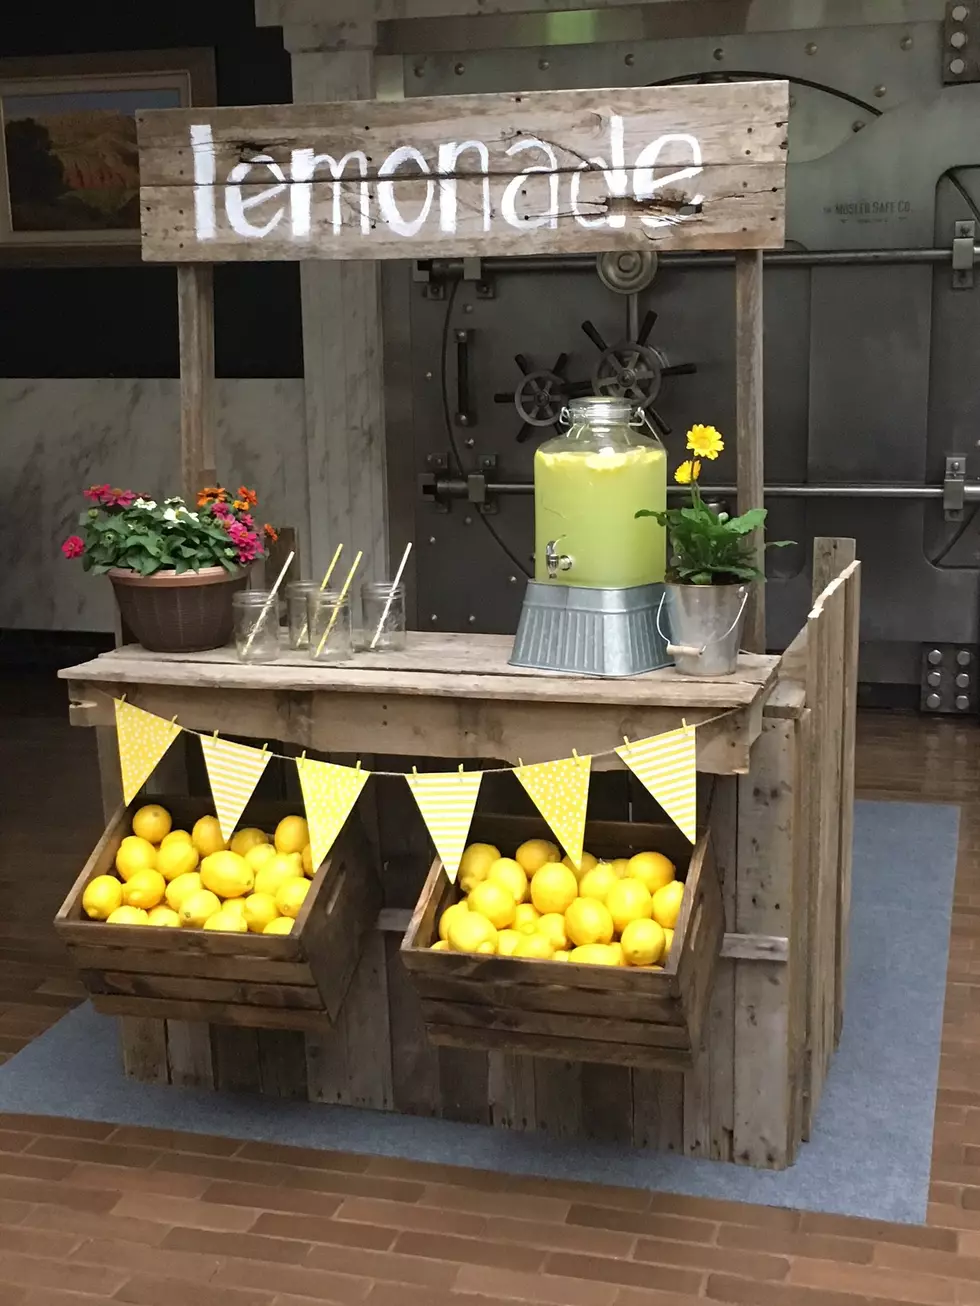 Lemonade Day Amarillo is This Saturday – Where You Need to Go